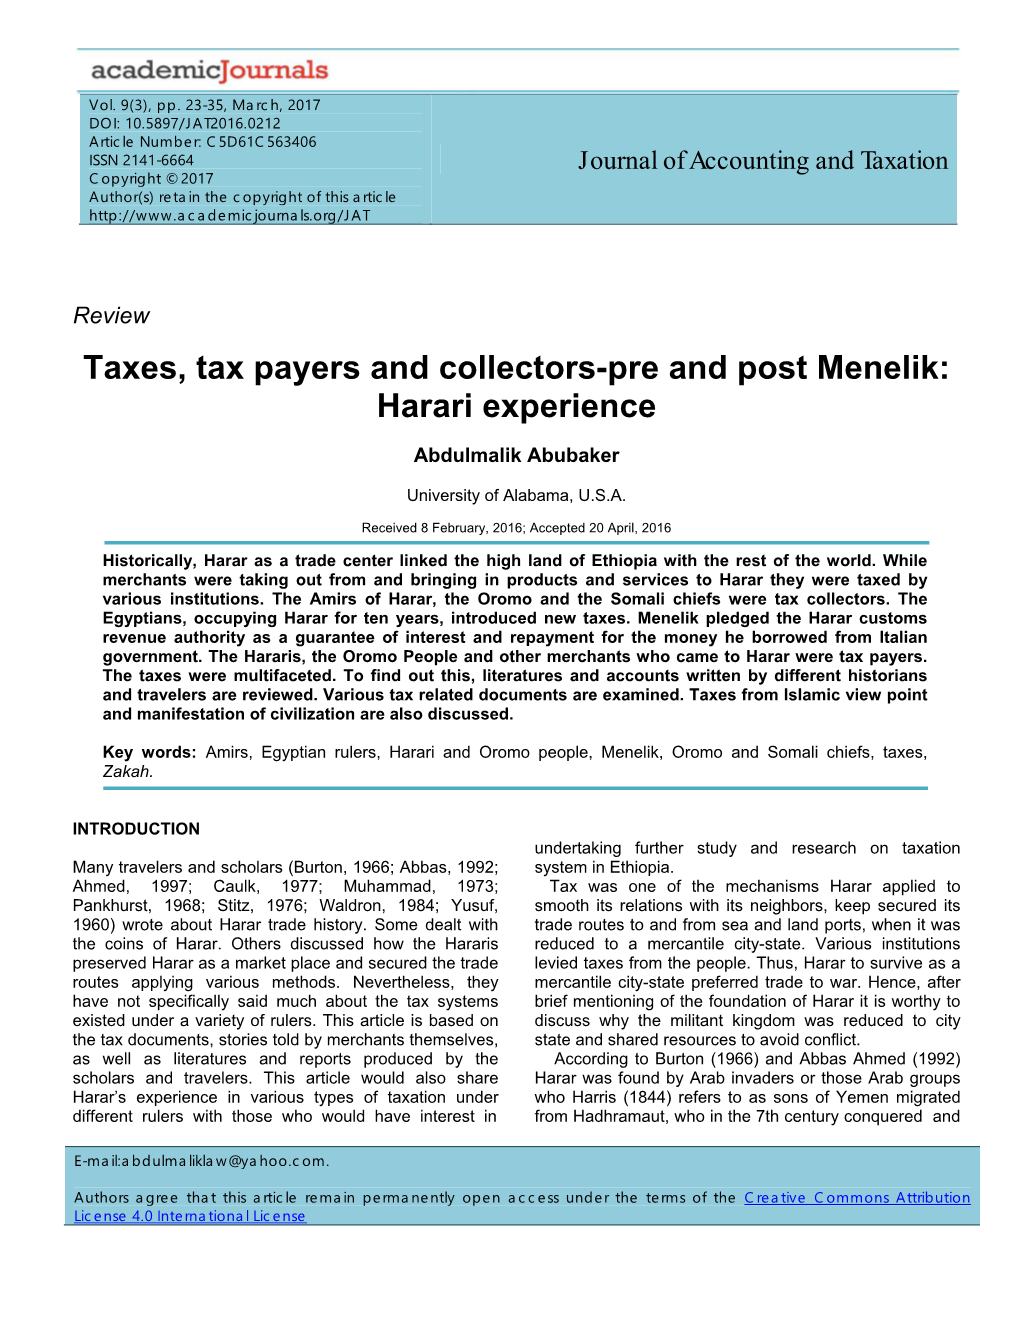 Taxes, Tax Payers and Collectors-Pre and Post Menelik: Harari Experience